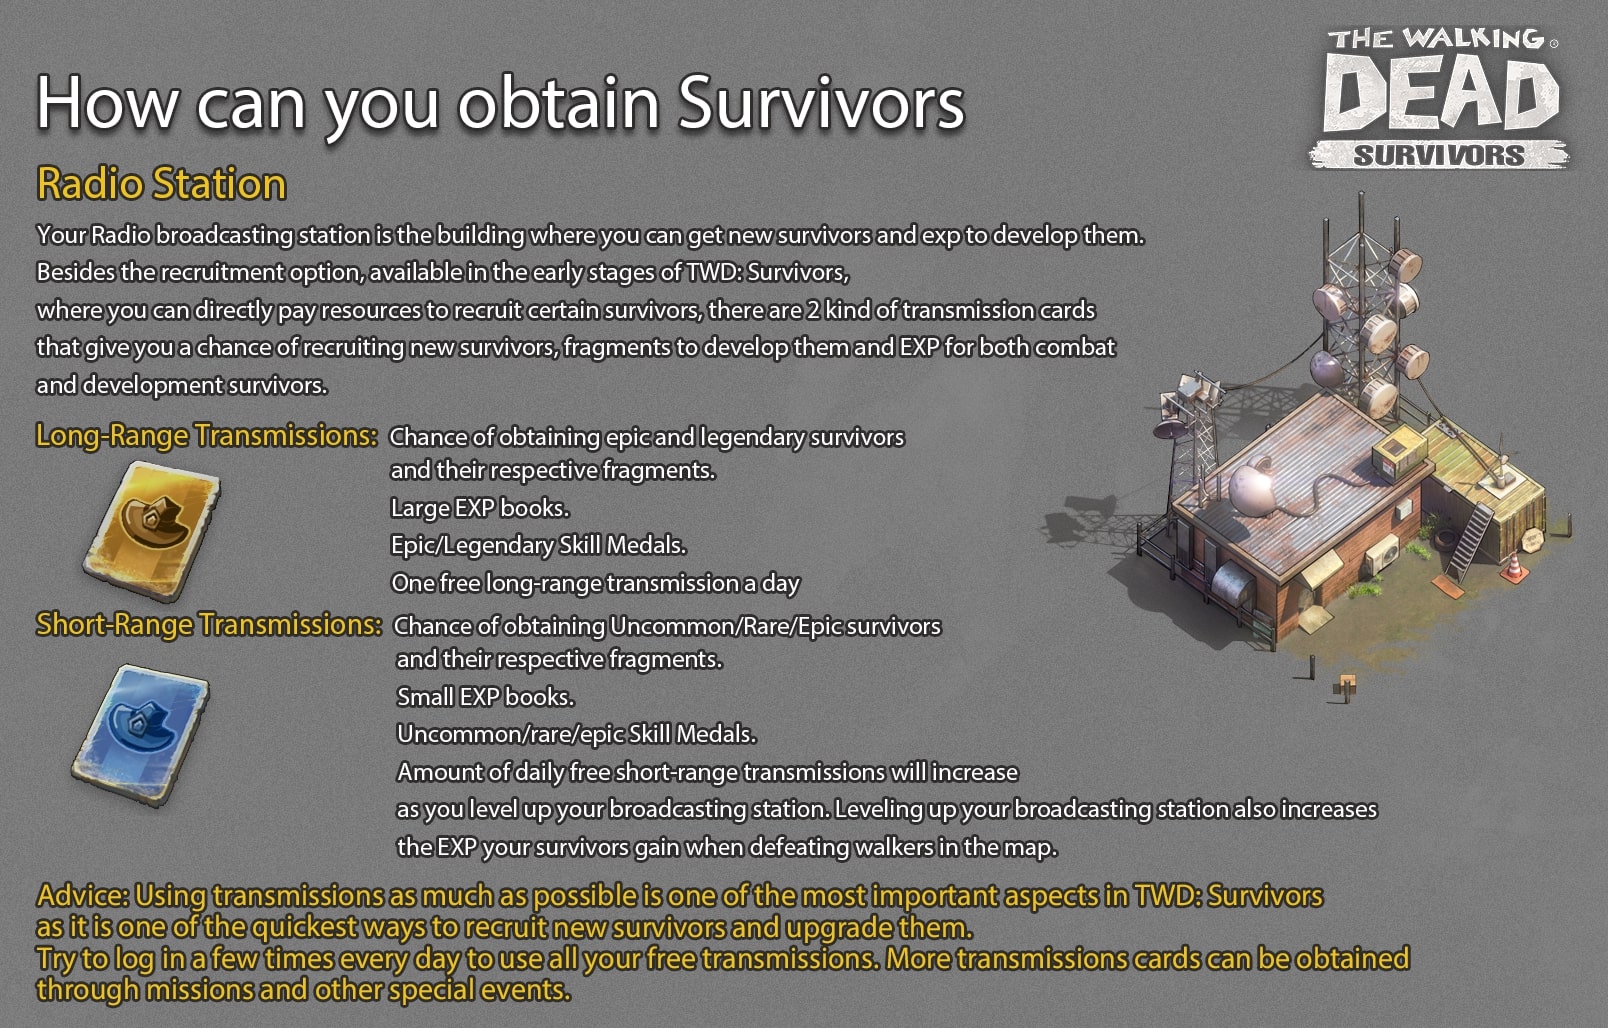 How_to_obtain_survivers_1.jpg